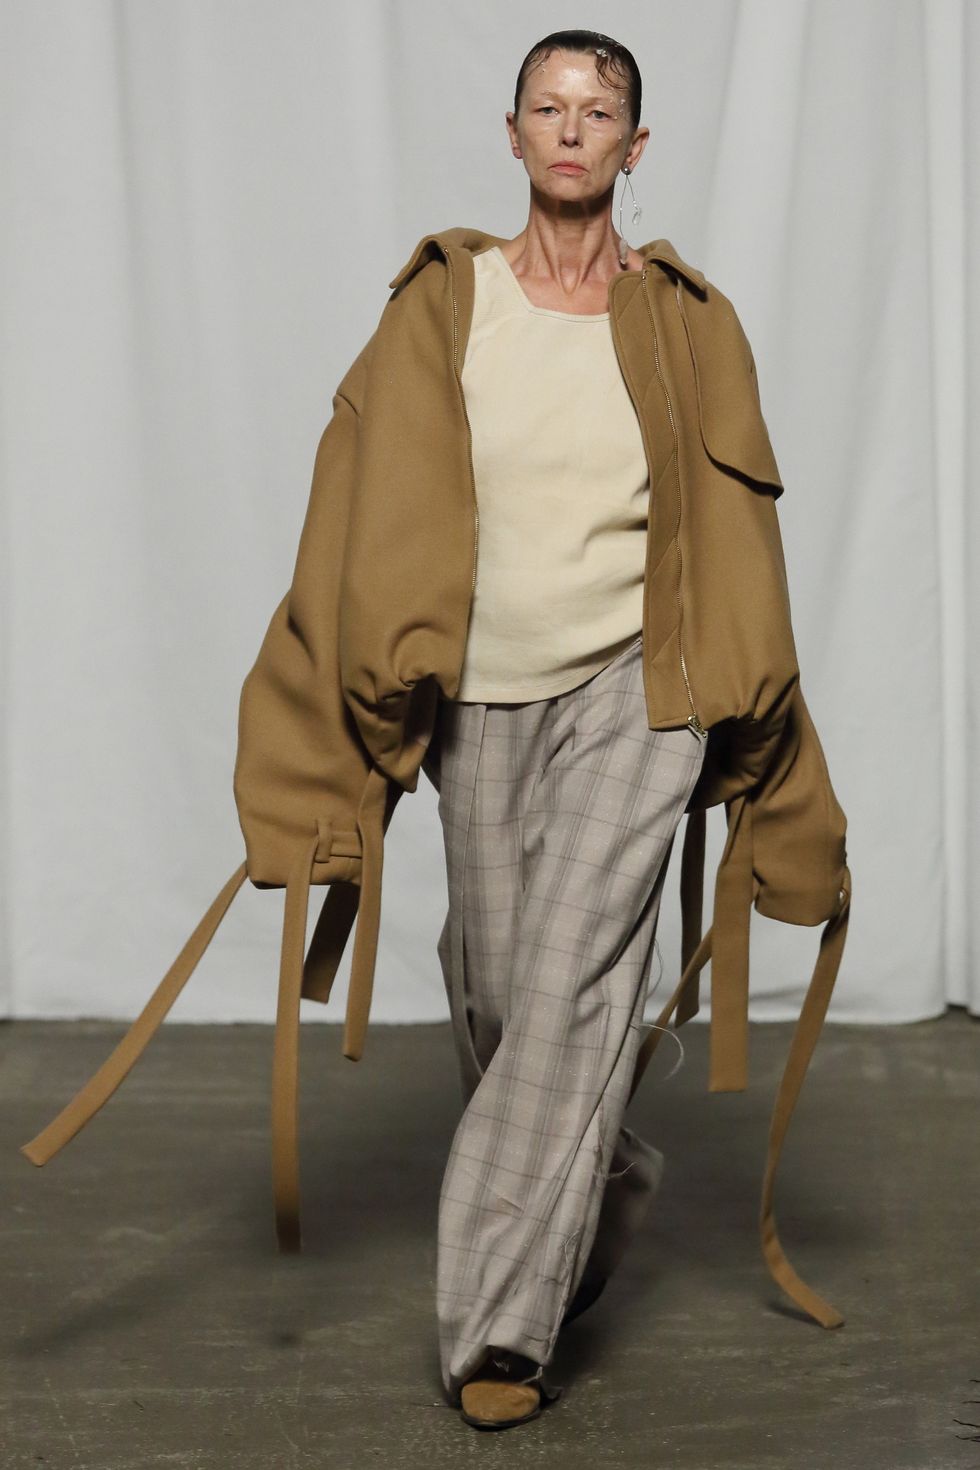 a person wearing a brown jacket and holding a cane